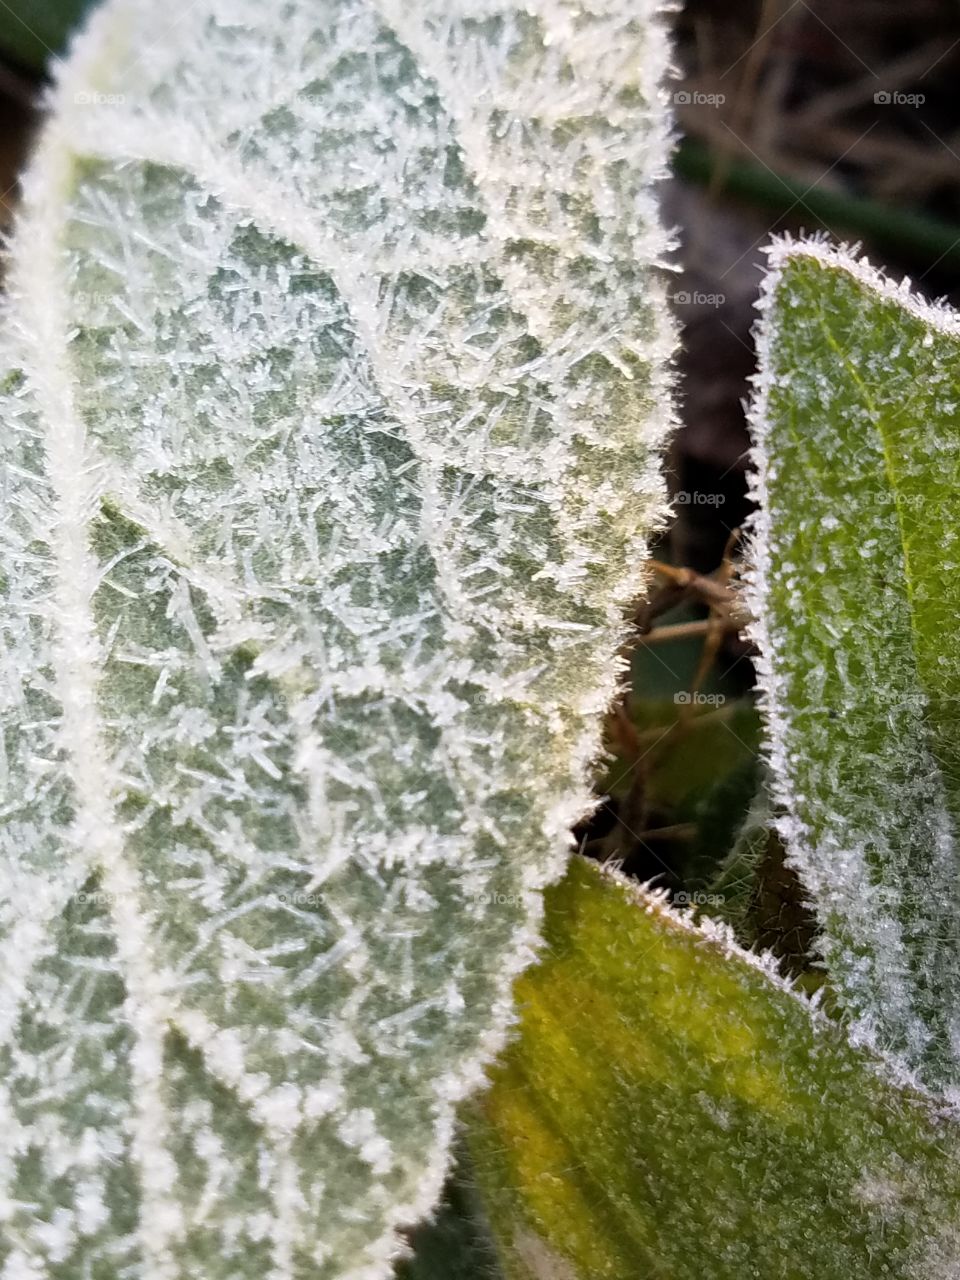 frost